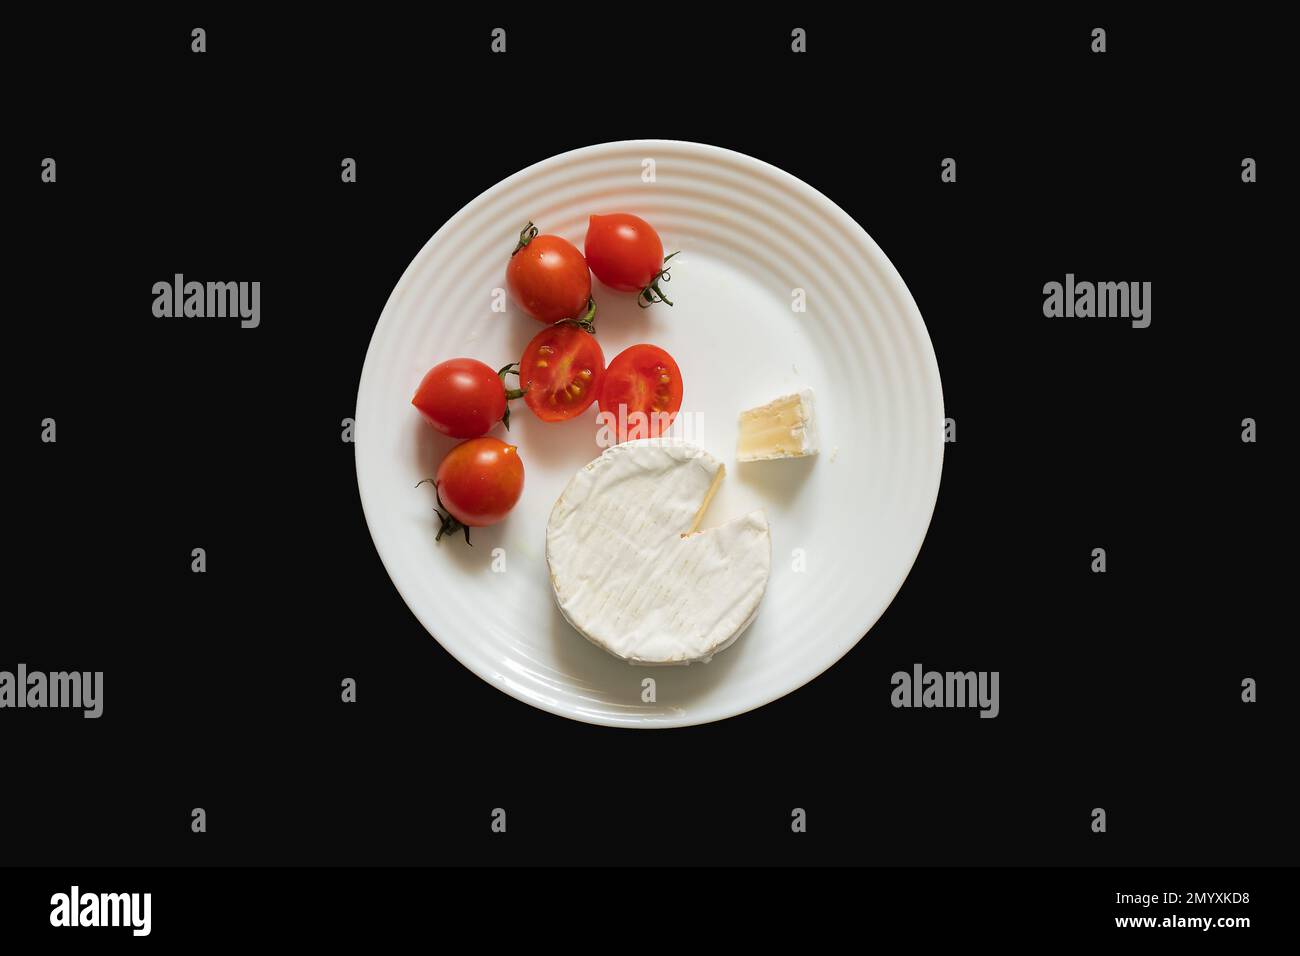 piece of brie cheese and cherry tomatoes on a white plate Stock Photo